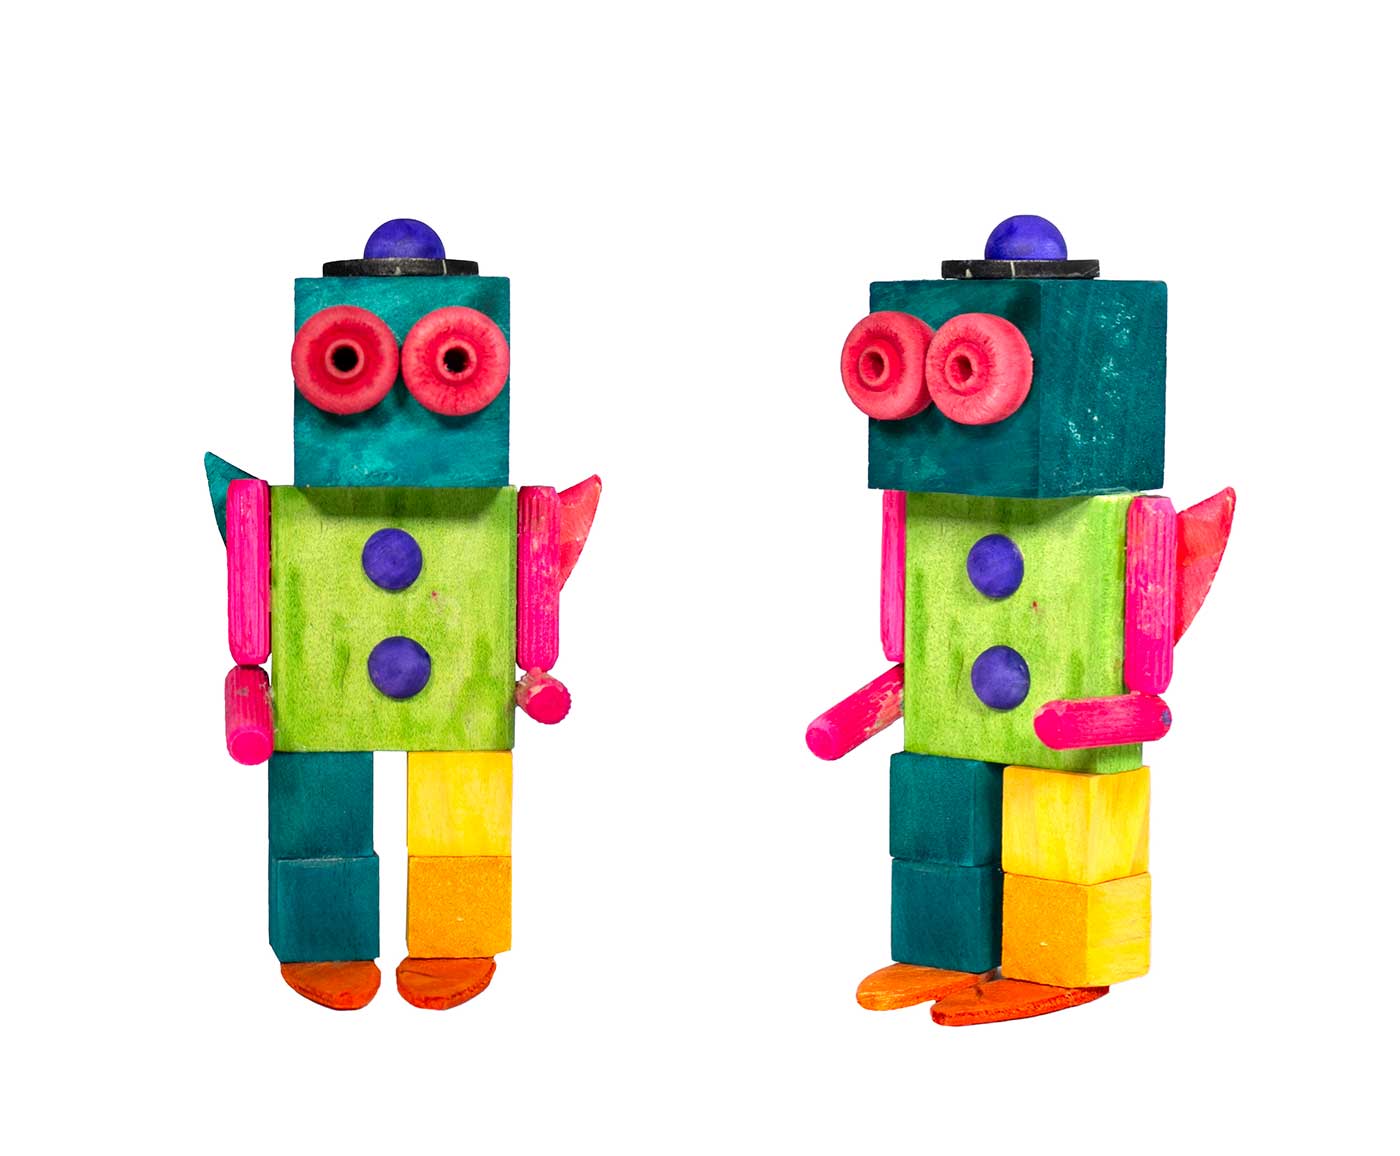 sculpture of colorful robot.